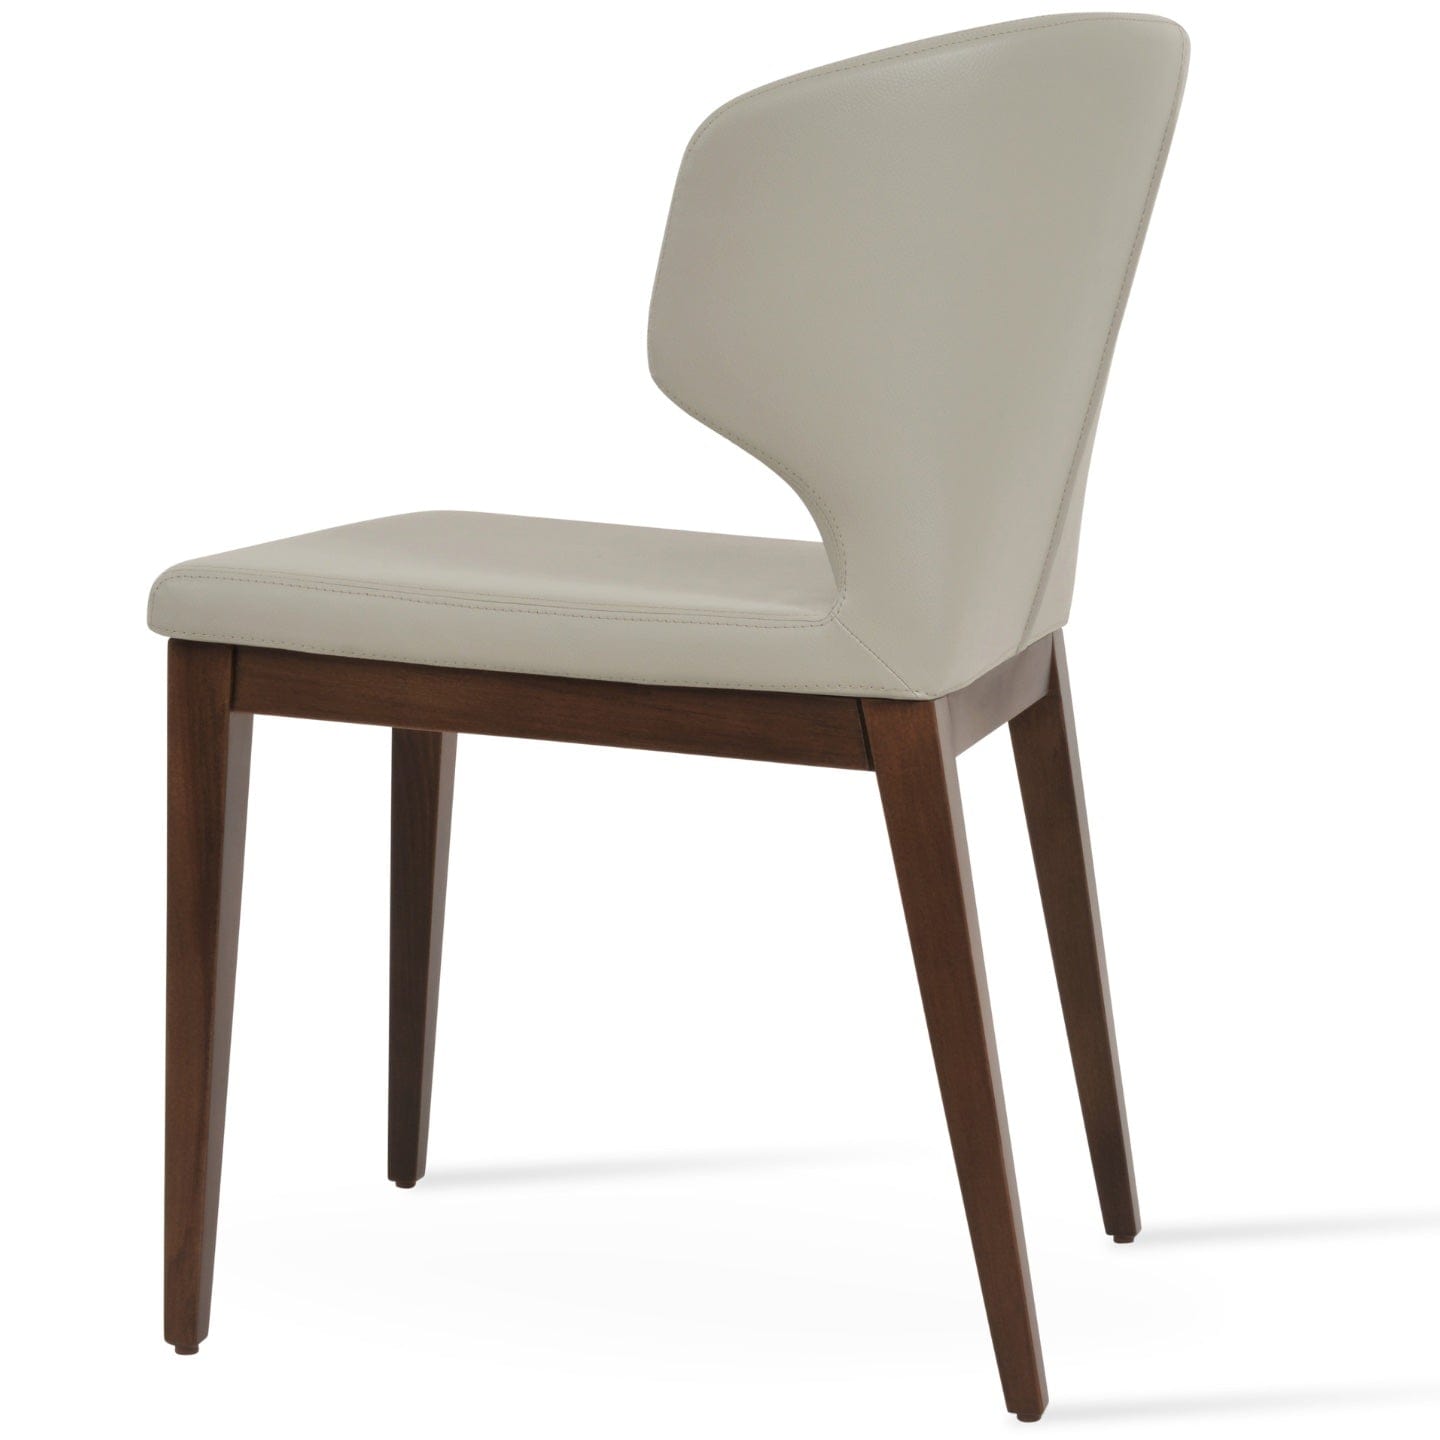 sohoConcept Kitchen & Dining Room Chairs Amed Wood Chairs | Leather Wooden Dining Chairs